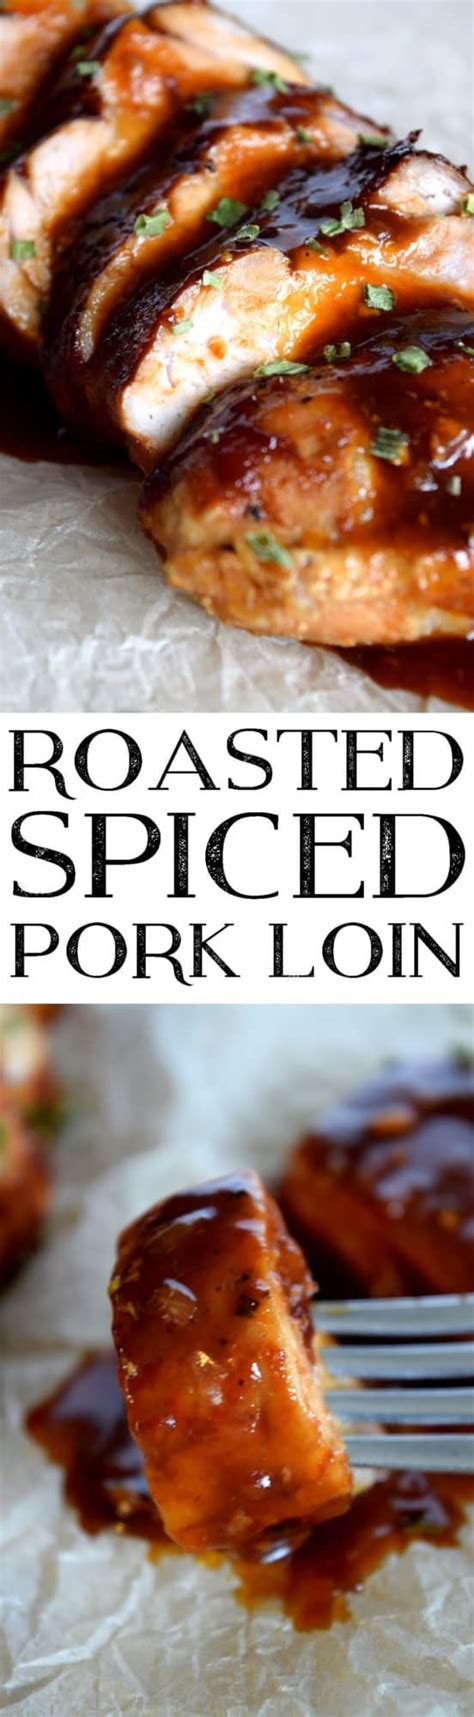 roasted spiced pork loin lord byron s kitchen